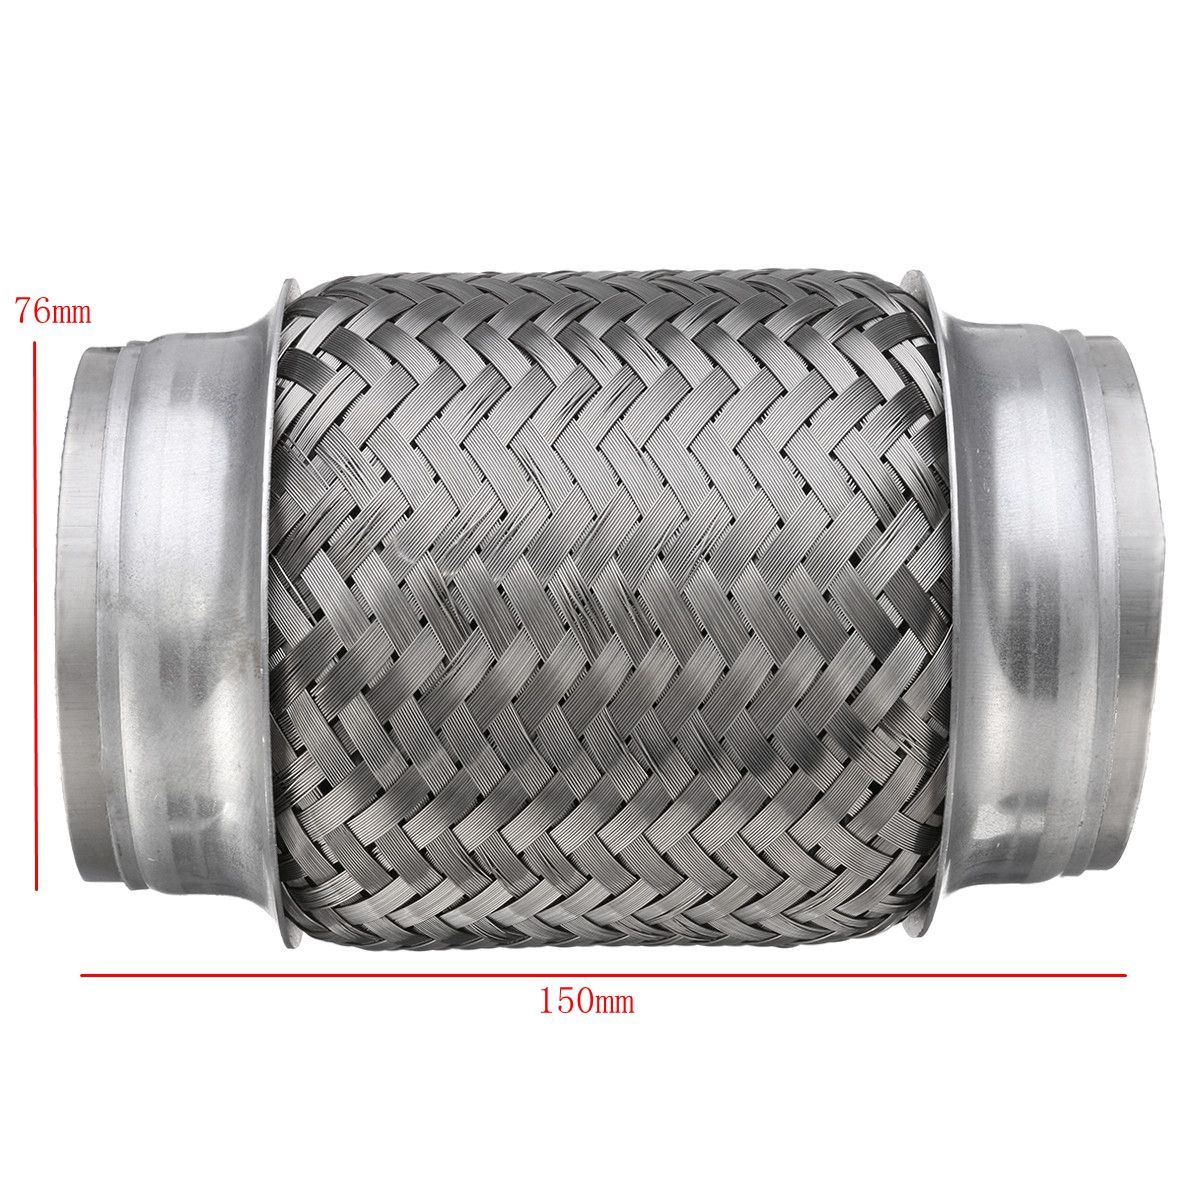 Exhaust-Flex-Pipe-Tube-Stainless-Steel-Double-Braid-3-Inch-X-6-Inch-w-Ends-Flexi-1251553